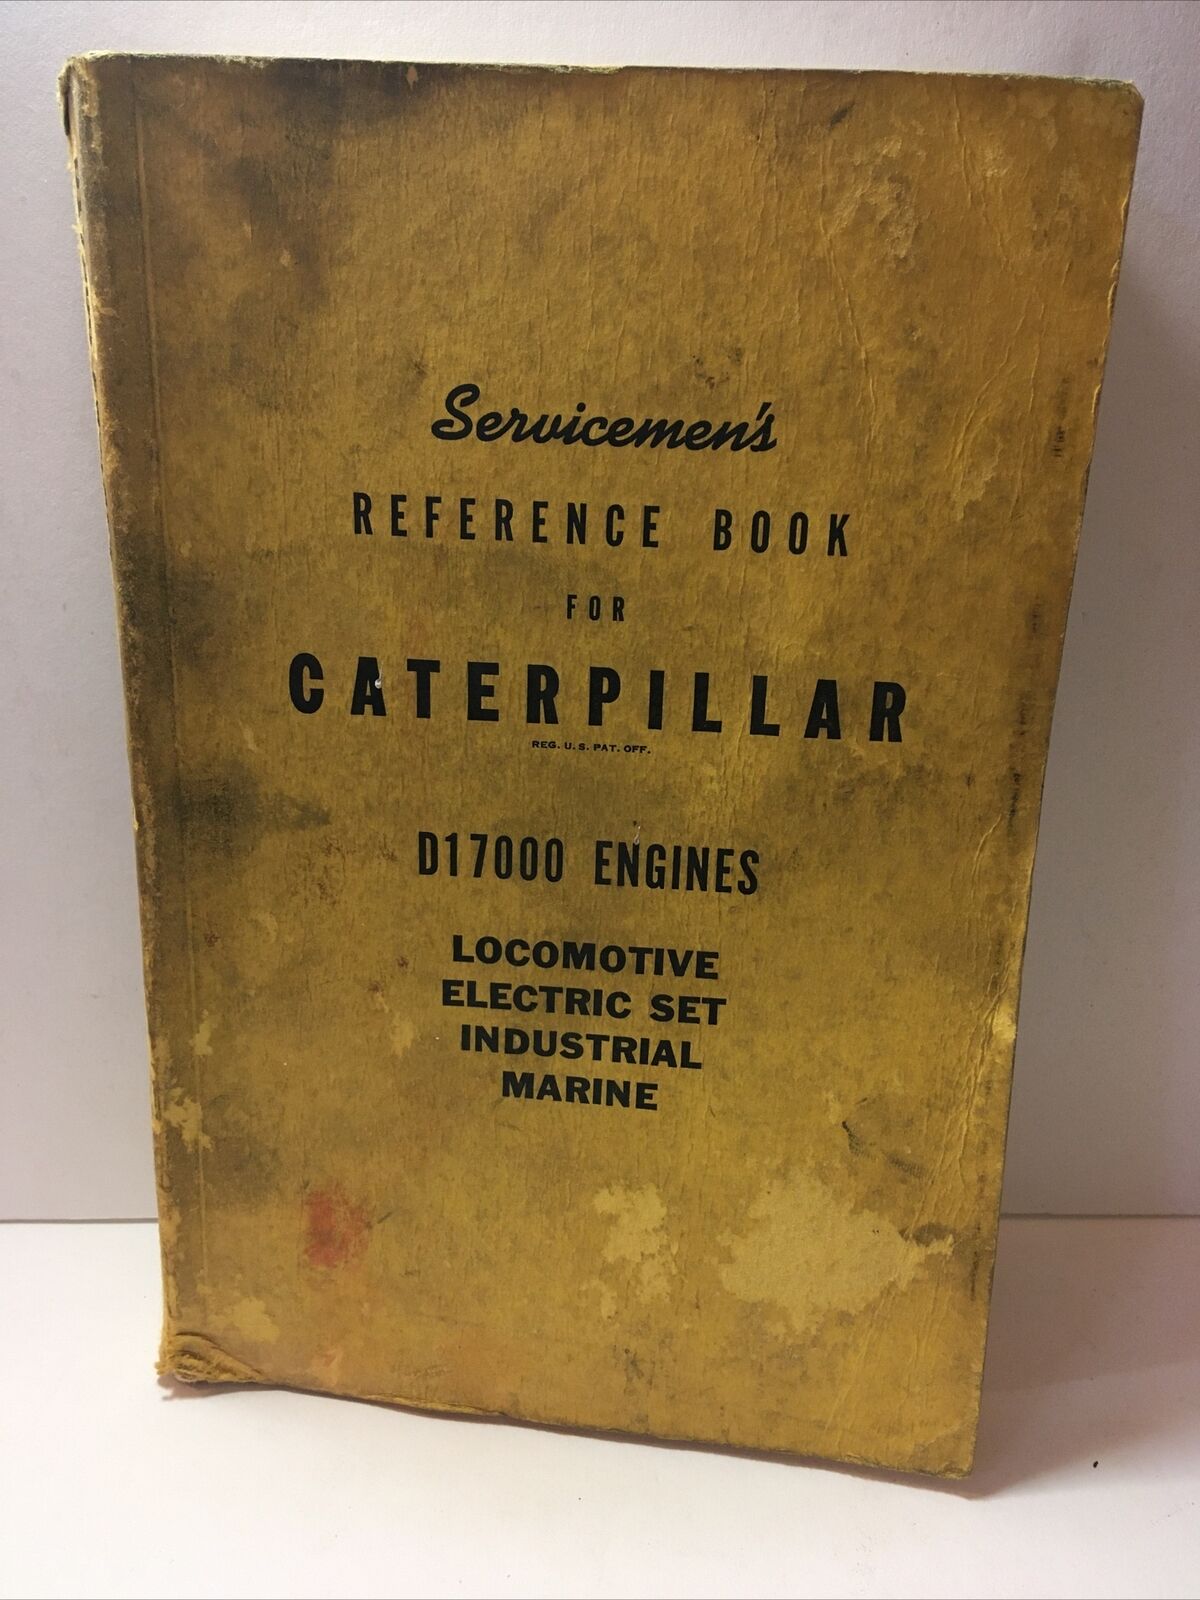 Vintage Servicemen’s Reference Book For Caterpillar D17000 Engines, Trains, Good